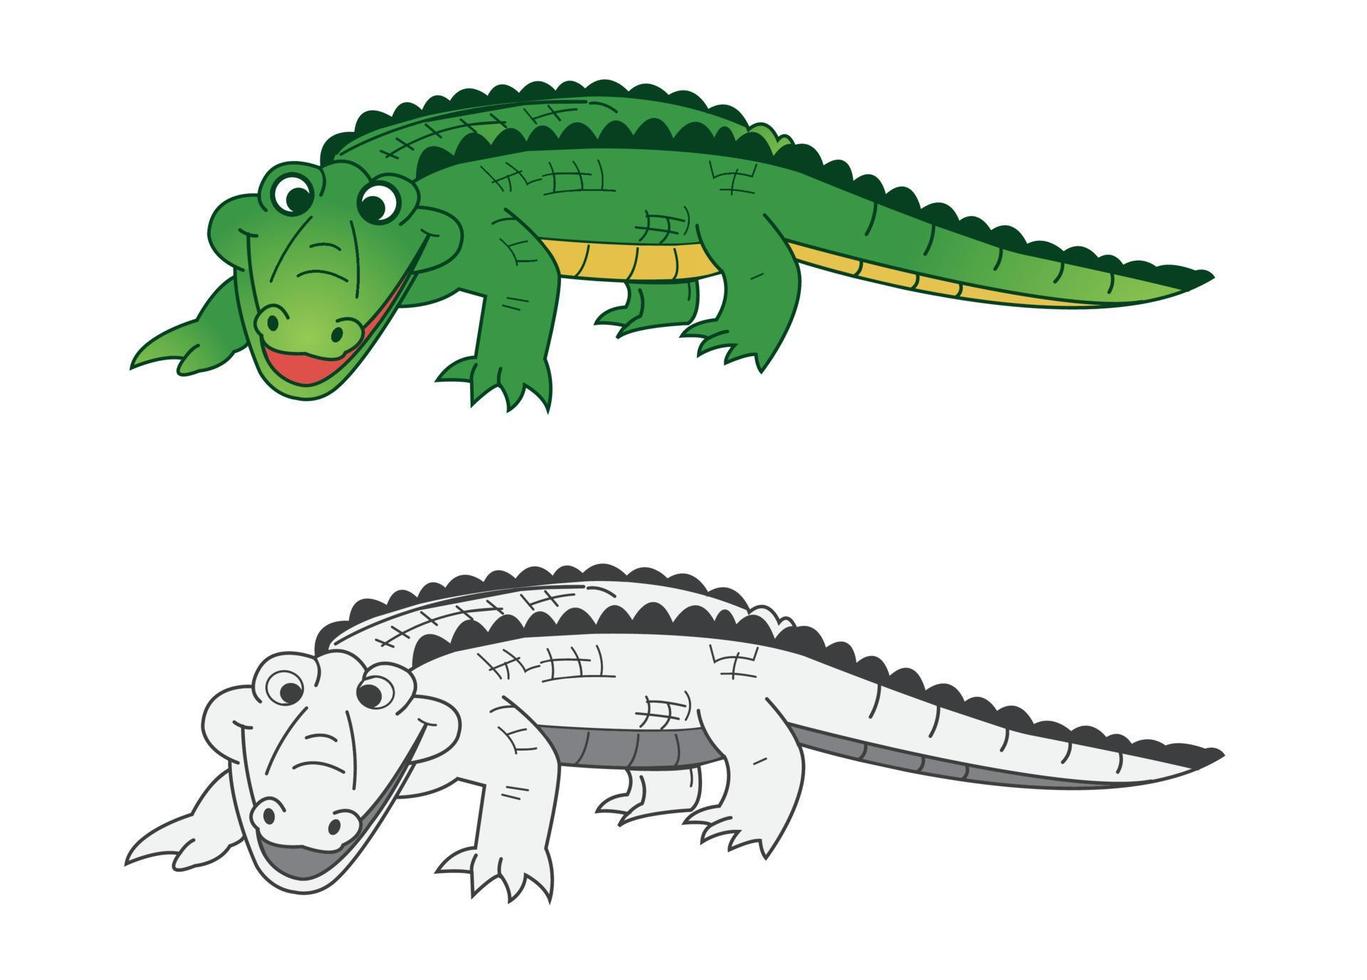 Wild Animals colored and with sketches vector